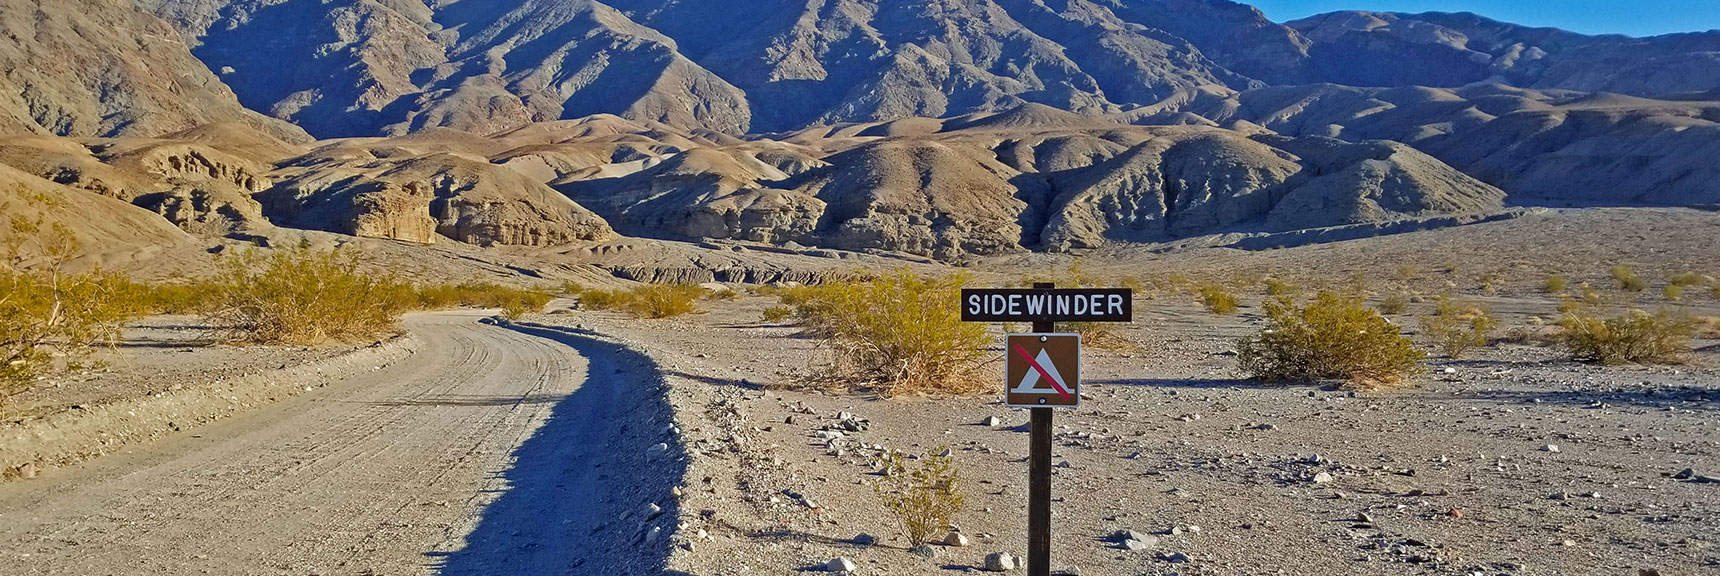 Entrance to 1000ft Approach Road Off Mile 31.5 on Badwater Road | Sidewinder Canyon | Death Valley National Park, California